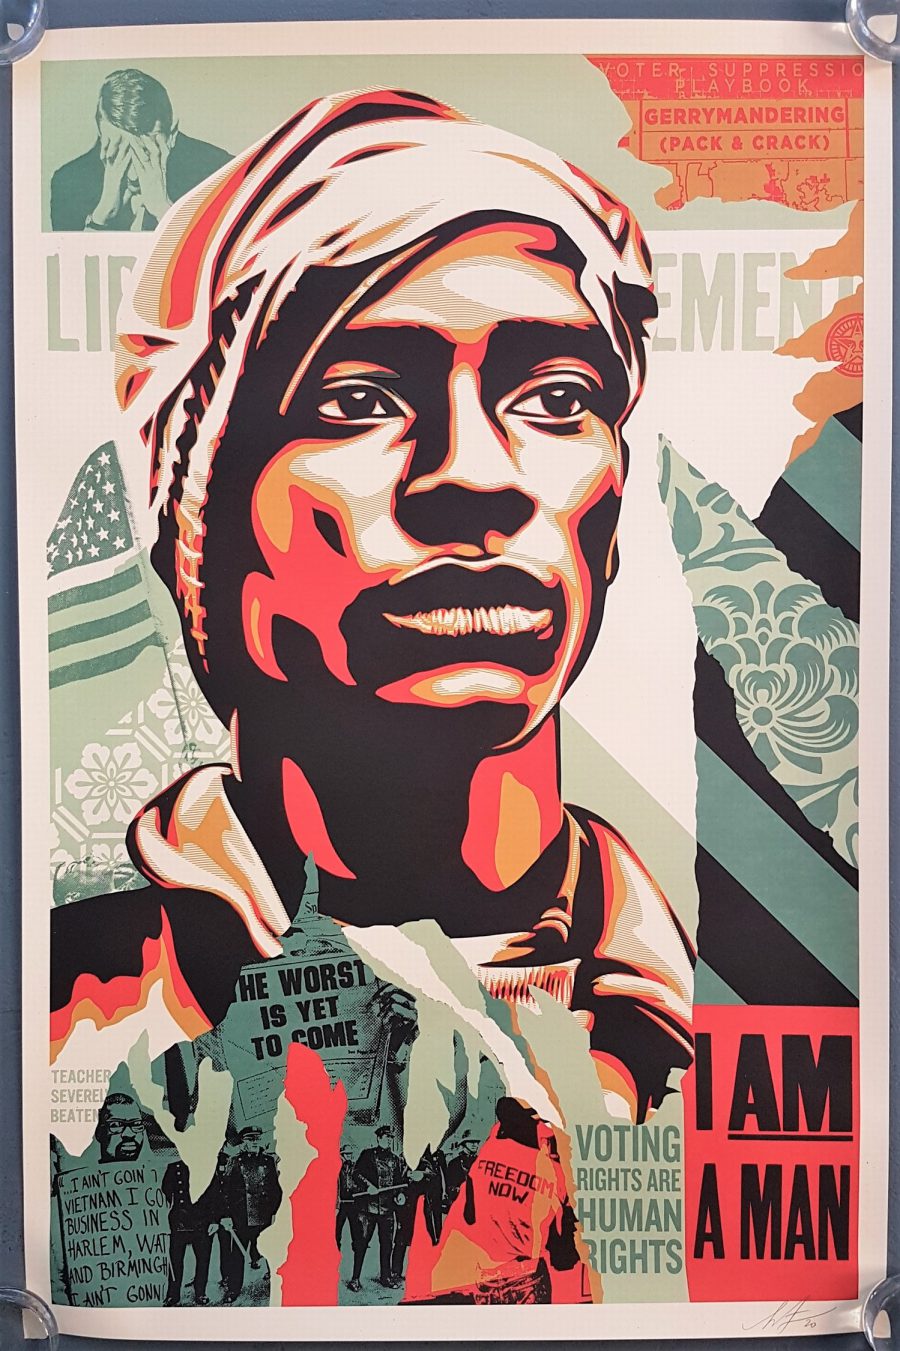 Voting Rights are Human Rights - Shepard Fairey